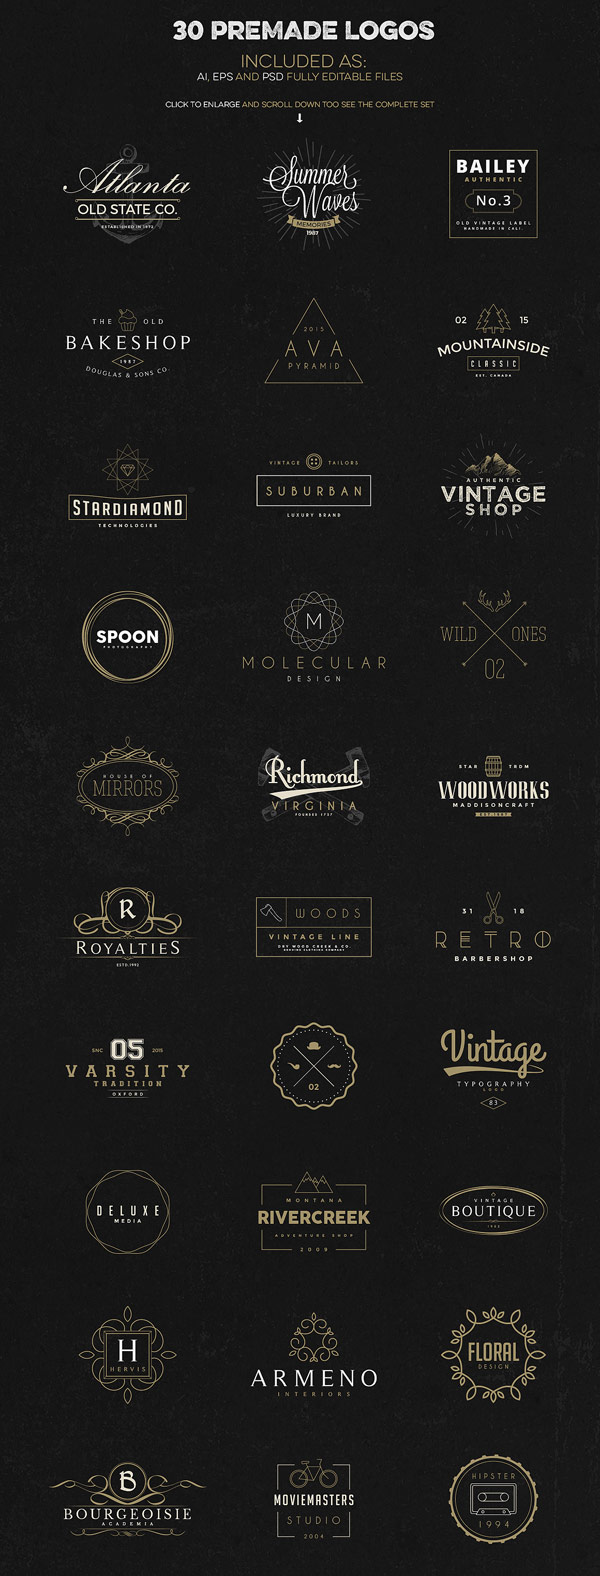 The 30 premade logos are included as fully editable AI, EPS, and PSD files.